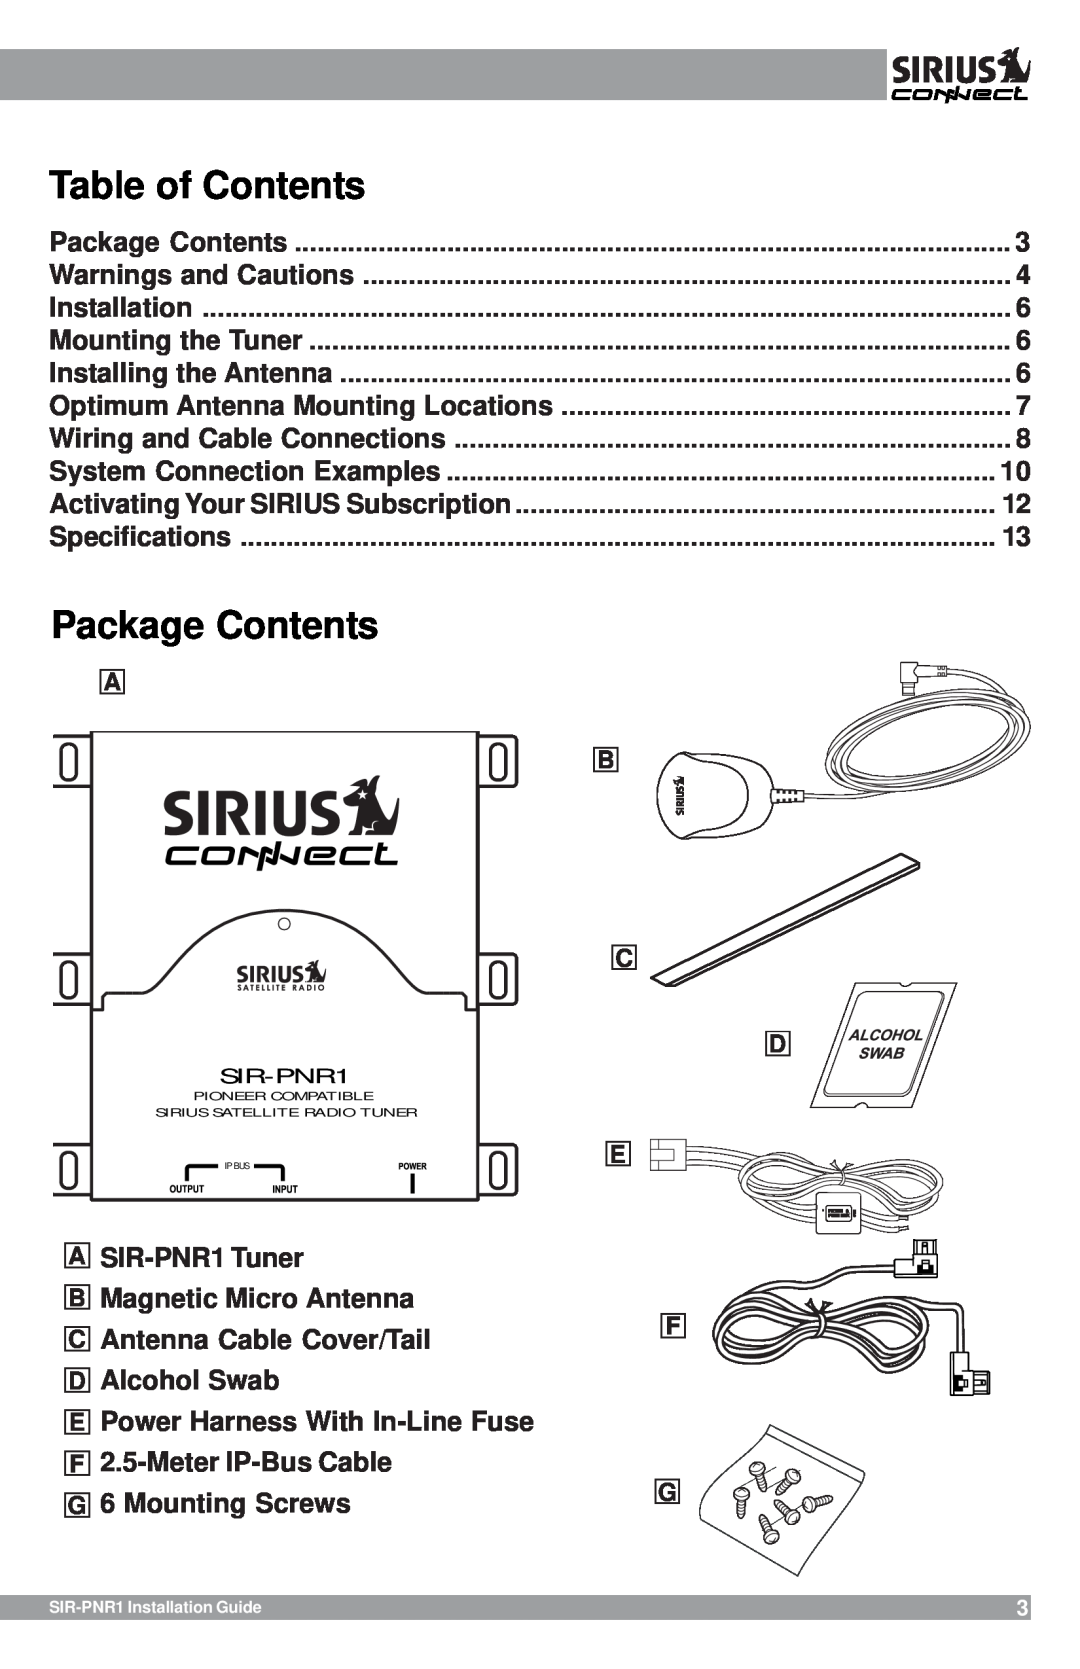 Sirius Satellite Radio SIR-PNR1 manual Package Contents, Table of Contents 